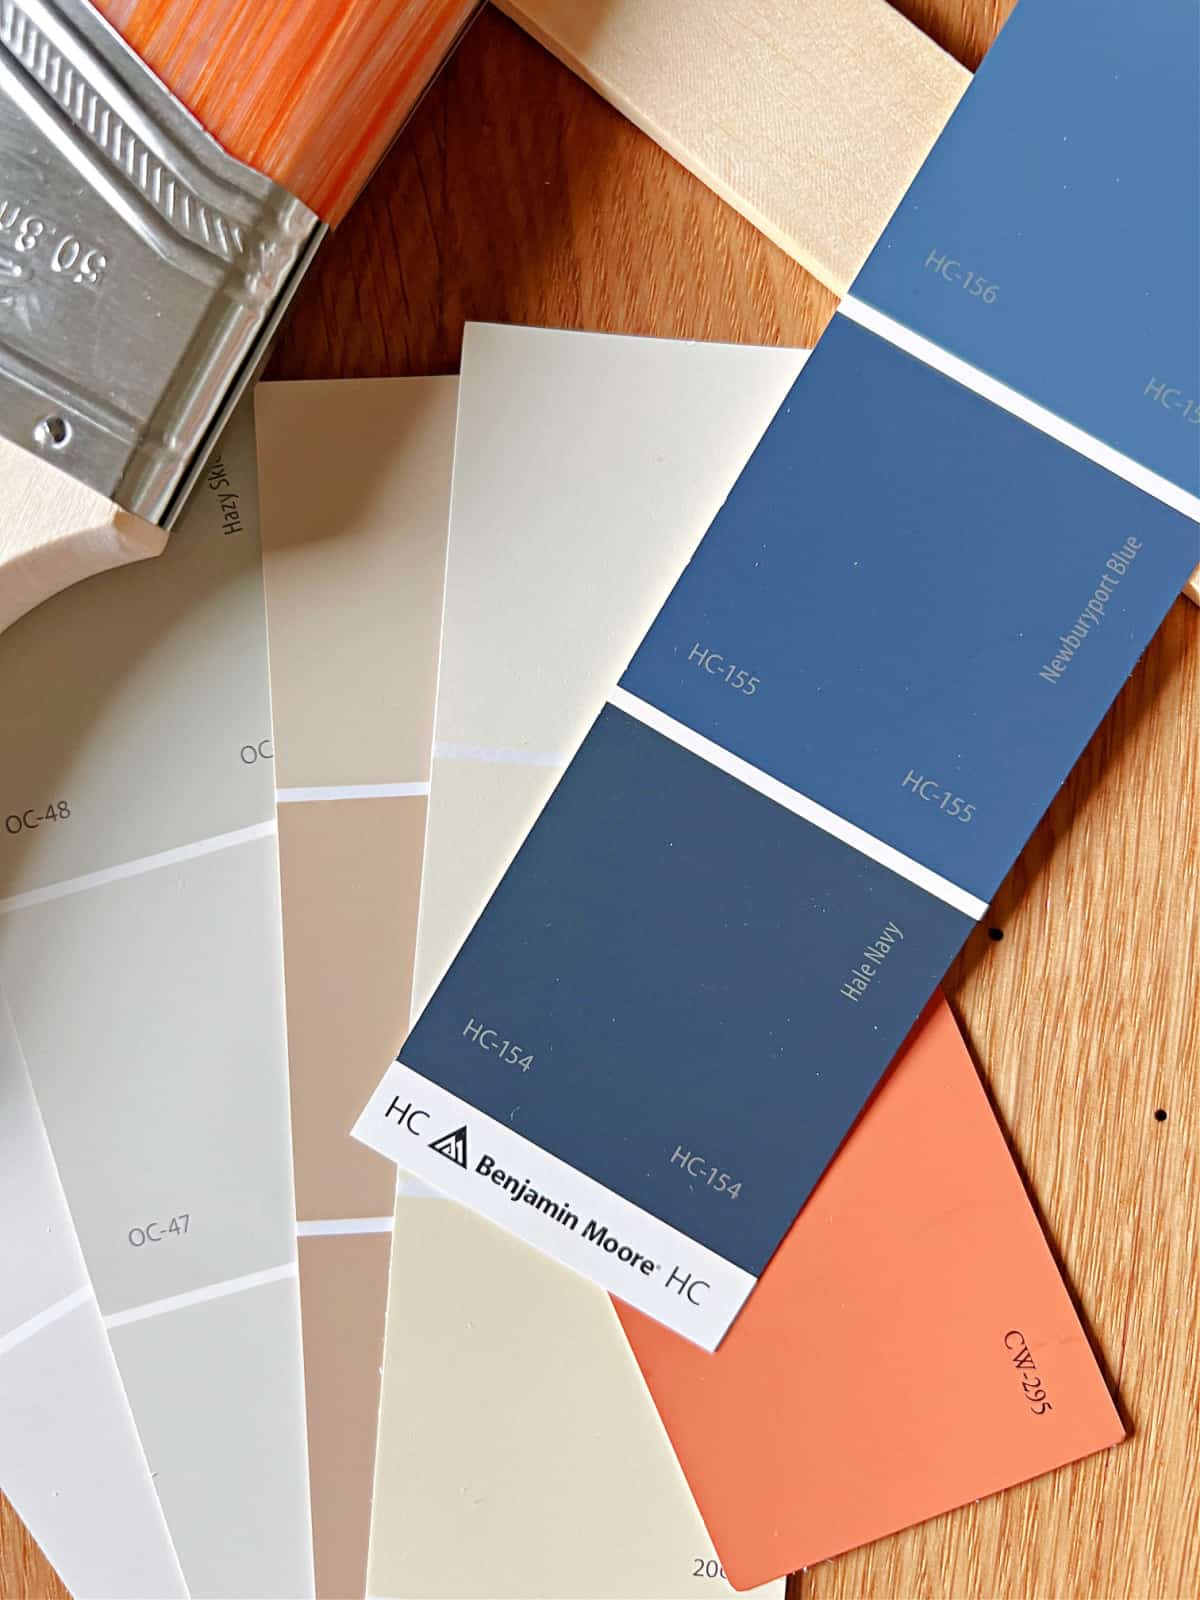 paint chips in navy blues, orange, beige and whites with paint brush and paint stick